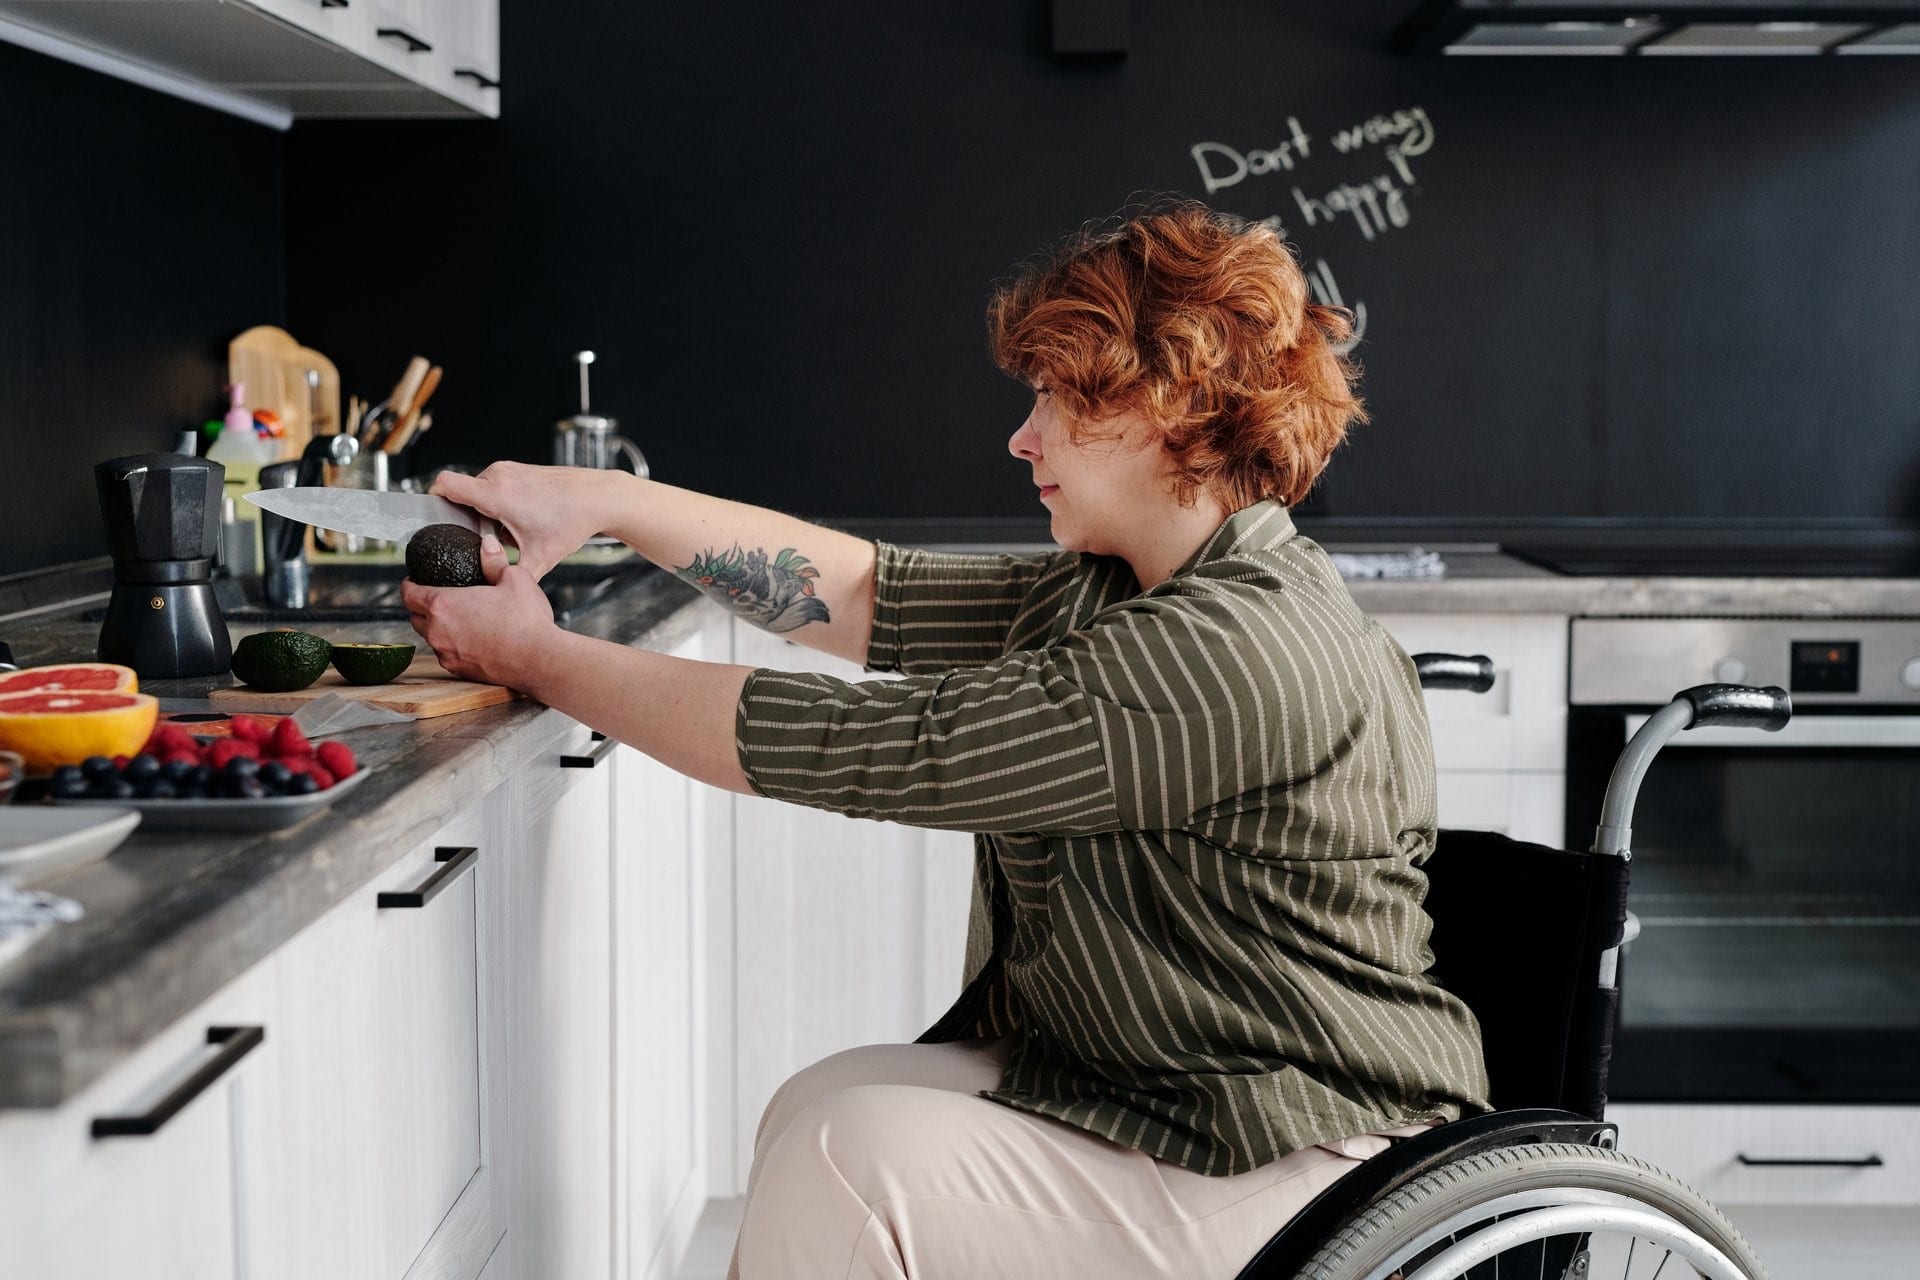 How to Buy an Accessible Home for Barrier-Free Living